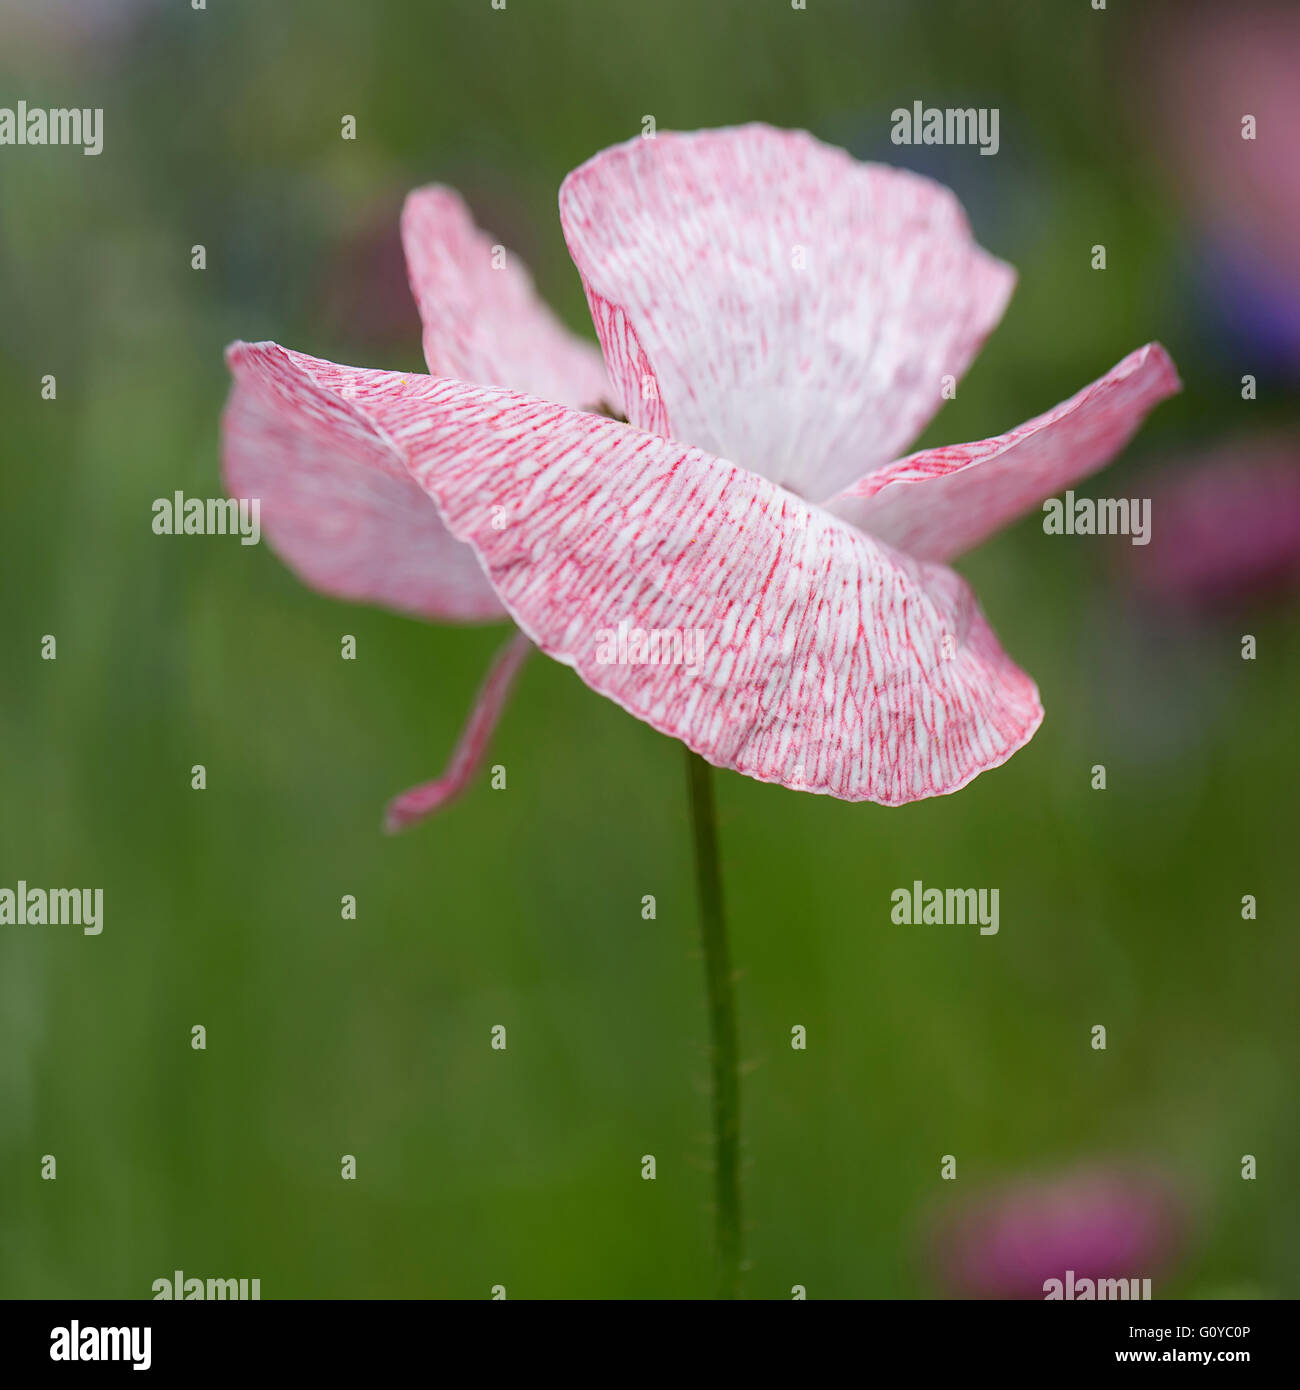 Poppy, Field poppy, Papaver, Papaver rhoeas 'Mother of Pearl', Annual, Beauty in Nature, Colour, Contemporary, Corn poppy, Cottage garden plant, Creative, Delicate, Flower, Summer Flowering, Frost hardy, Growing, Outdoor, Plant, Pink, Stock Photo